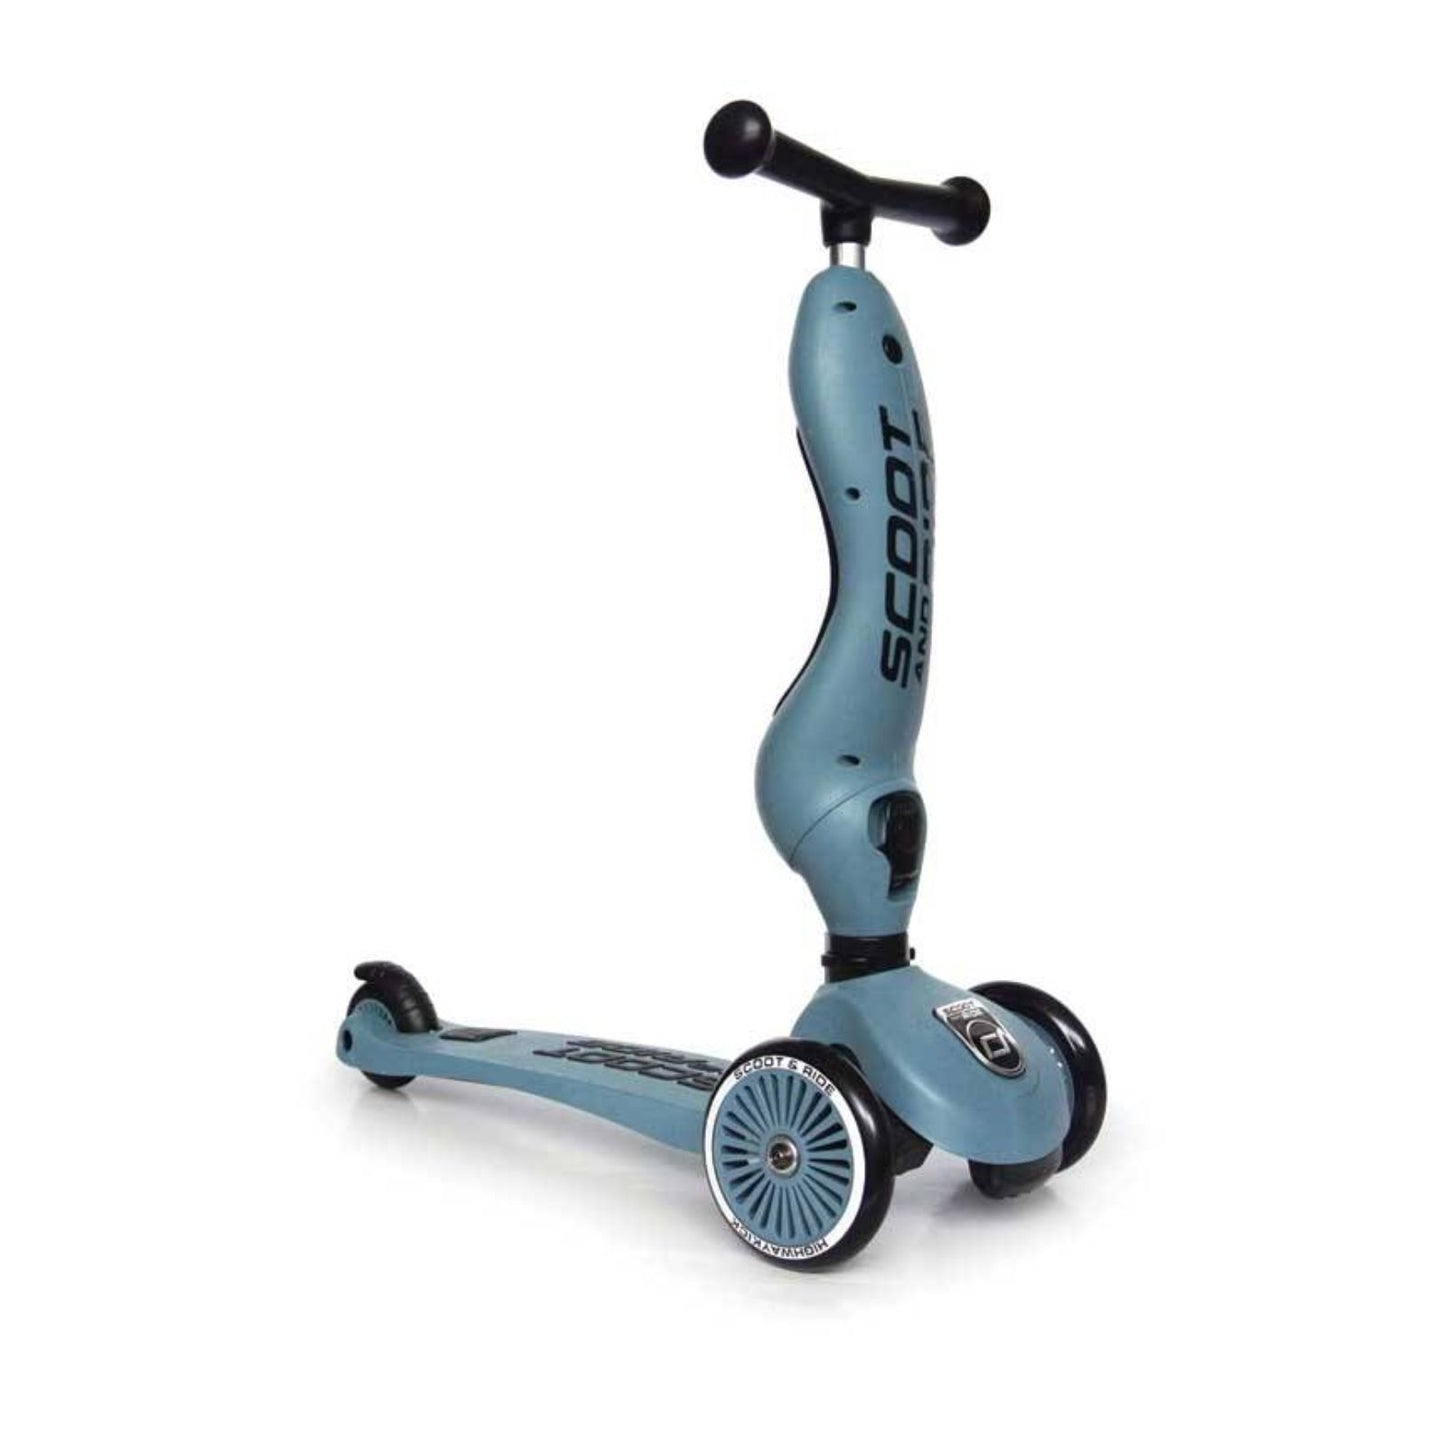 Scoot & Ride - Highwaykick1 Scooter For Toddler 1-5Y (Steel)